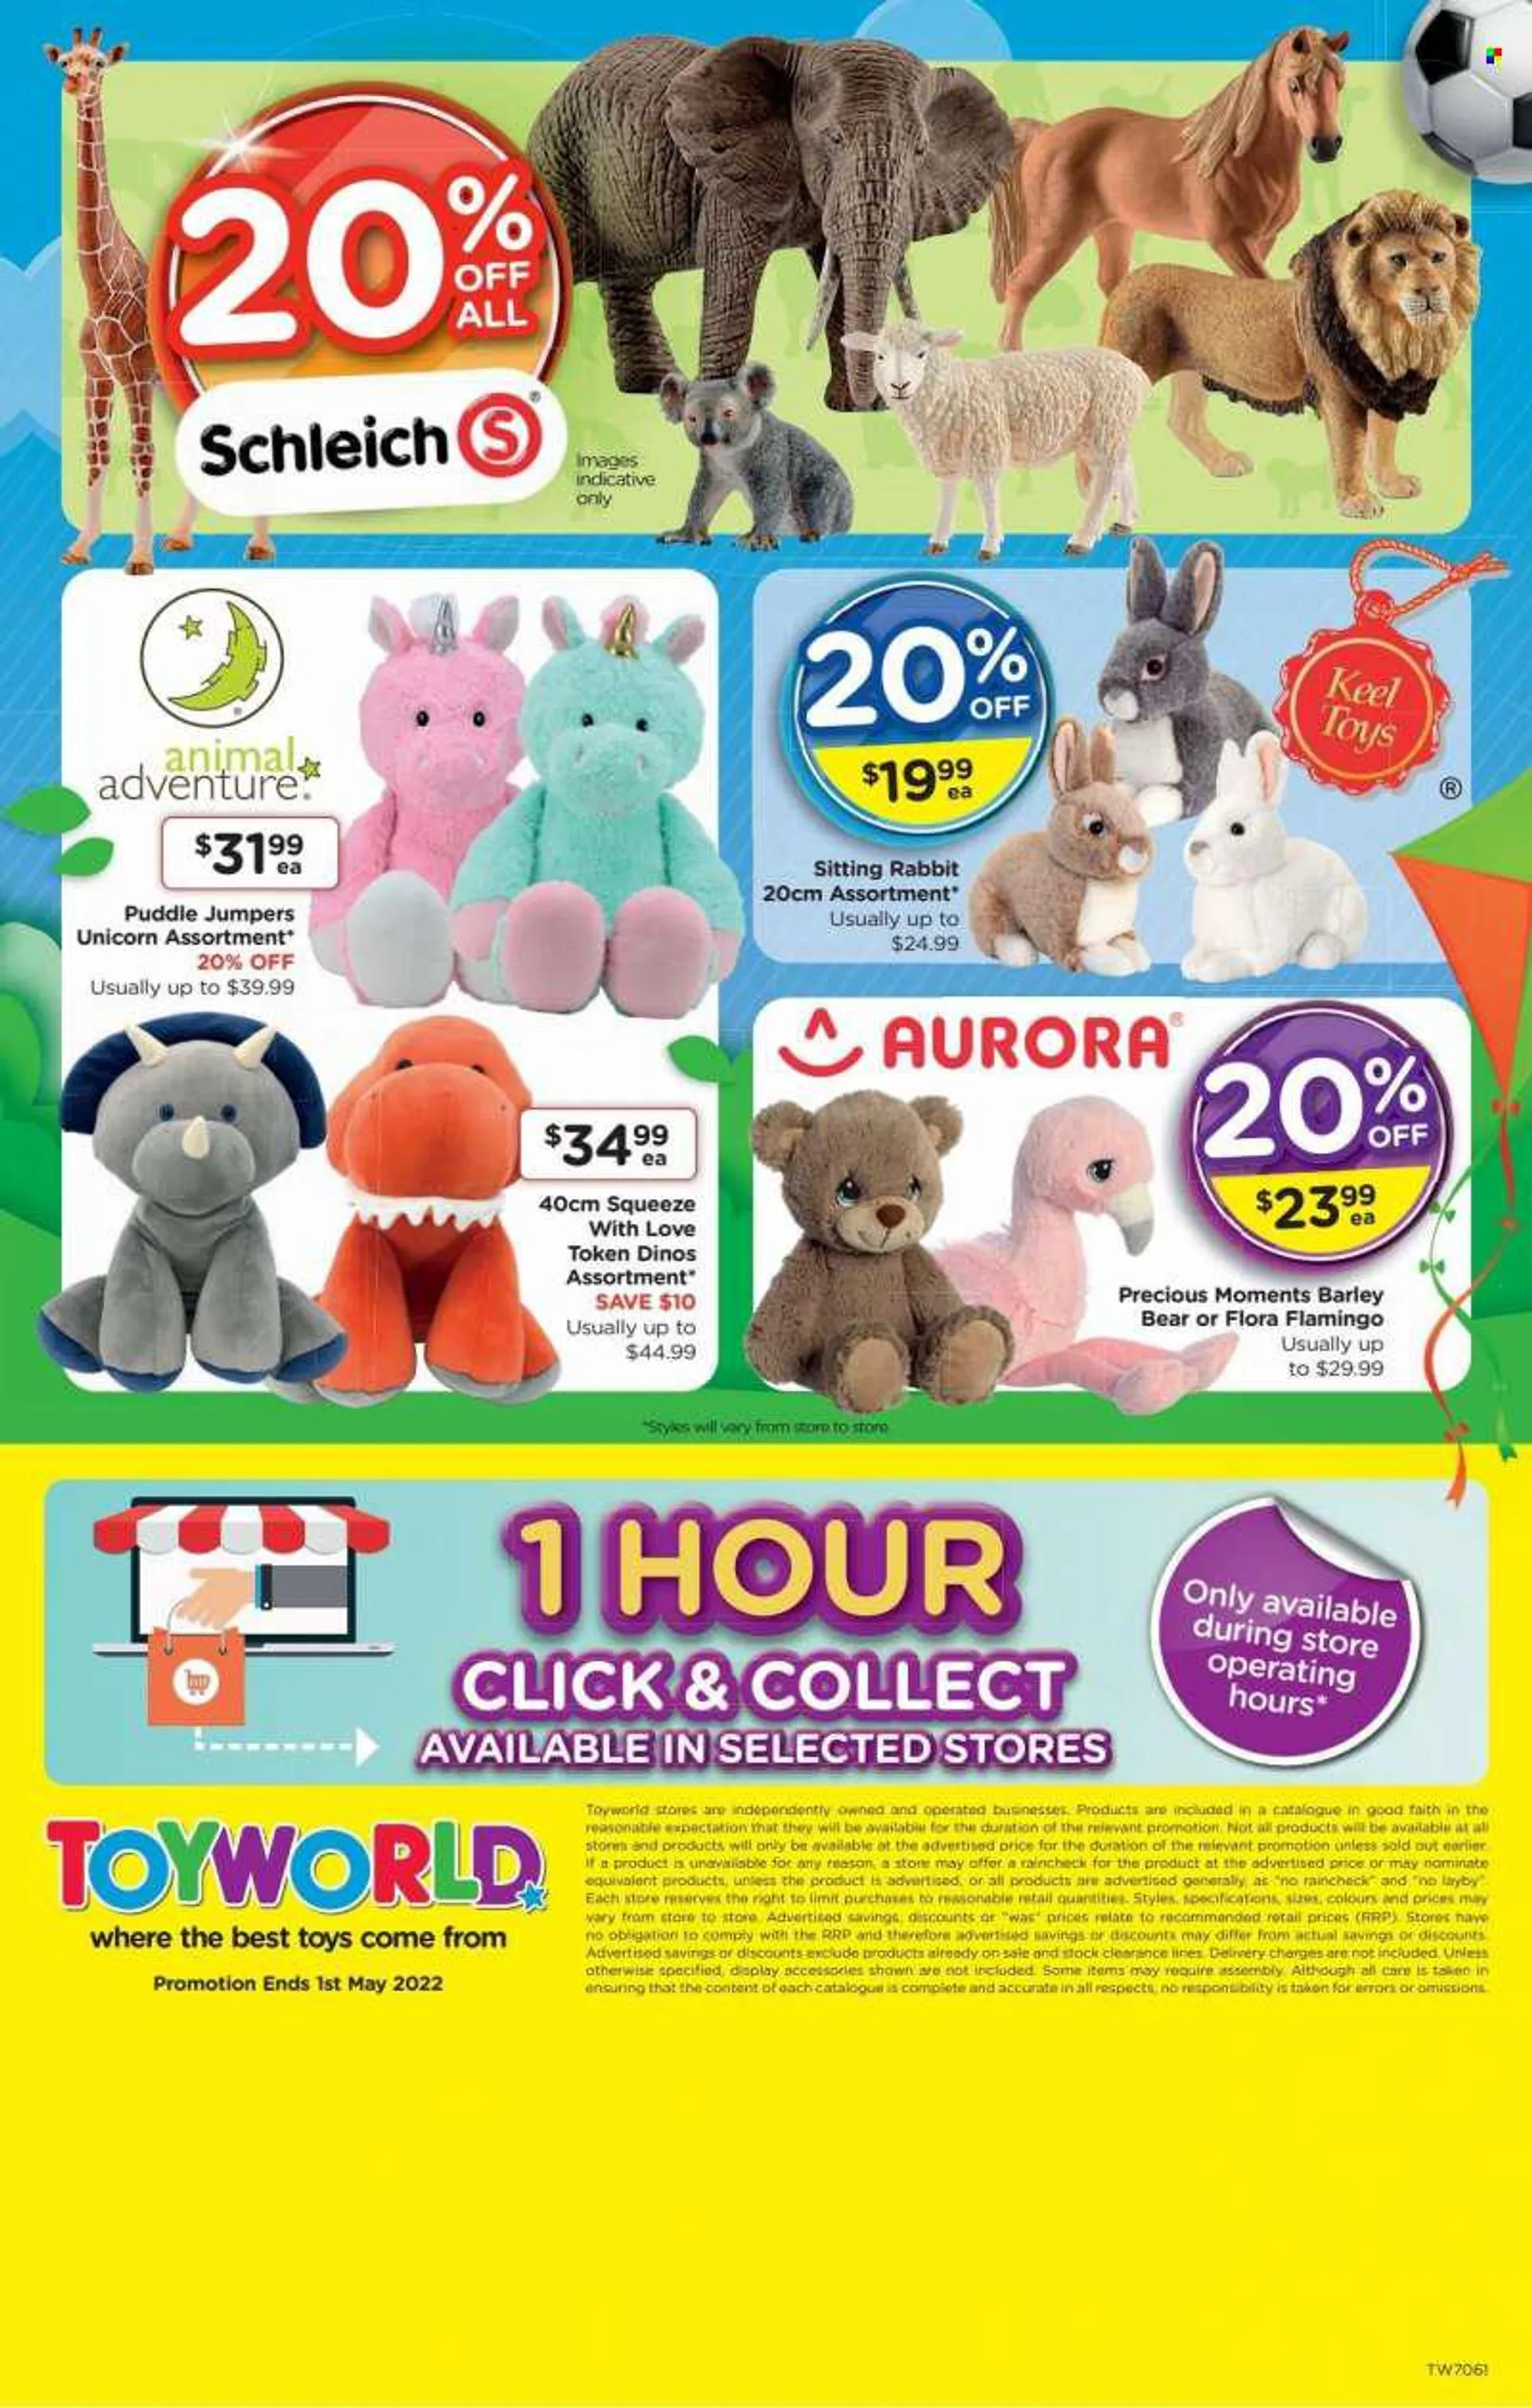 Toyworld mailer - 13.04.2022 - 01.05.2022. - 13 April 1 May 2022 - Page 16